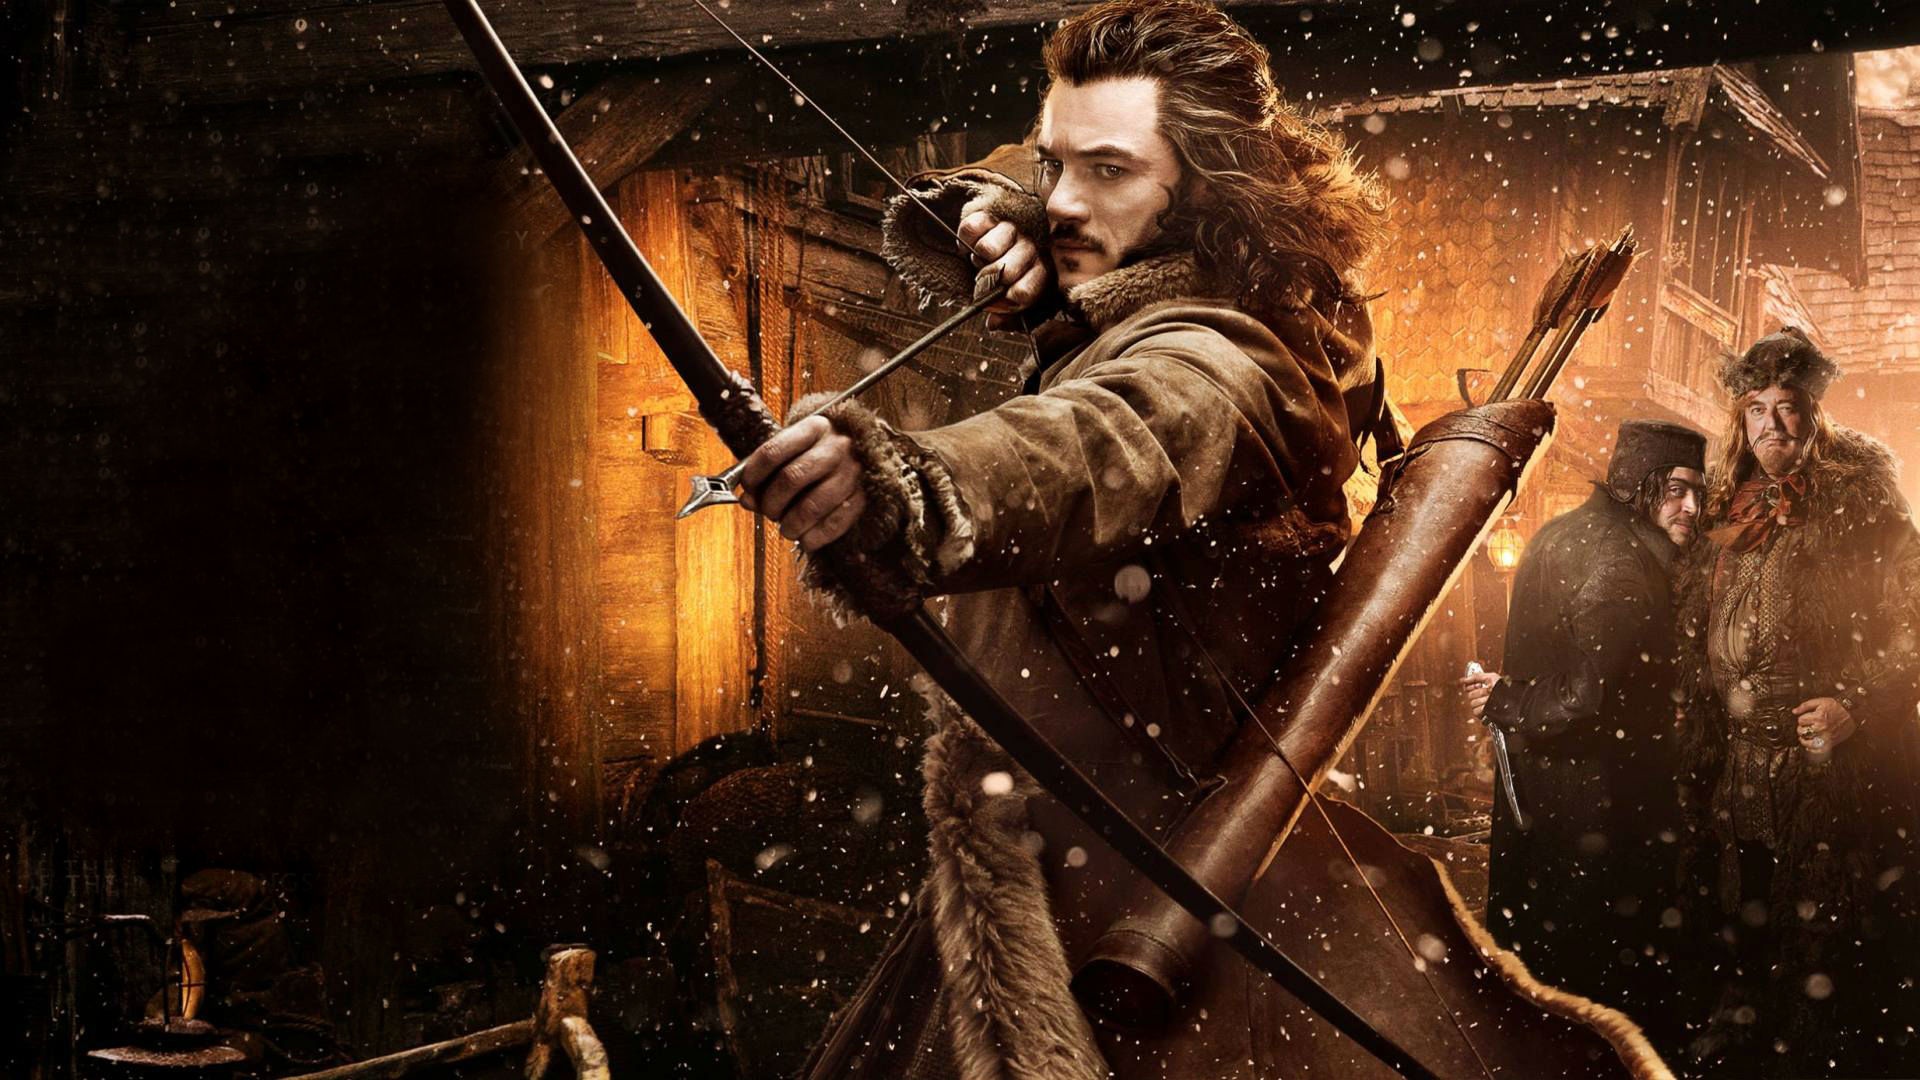 Bow And Arrow Wallpaper Rings The Hobbit